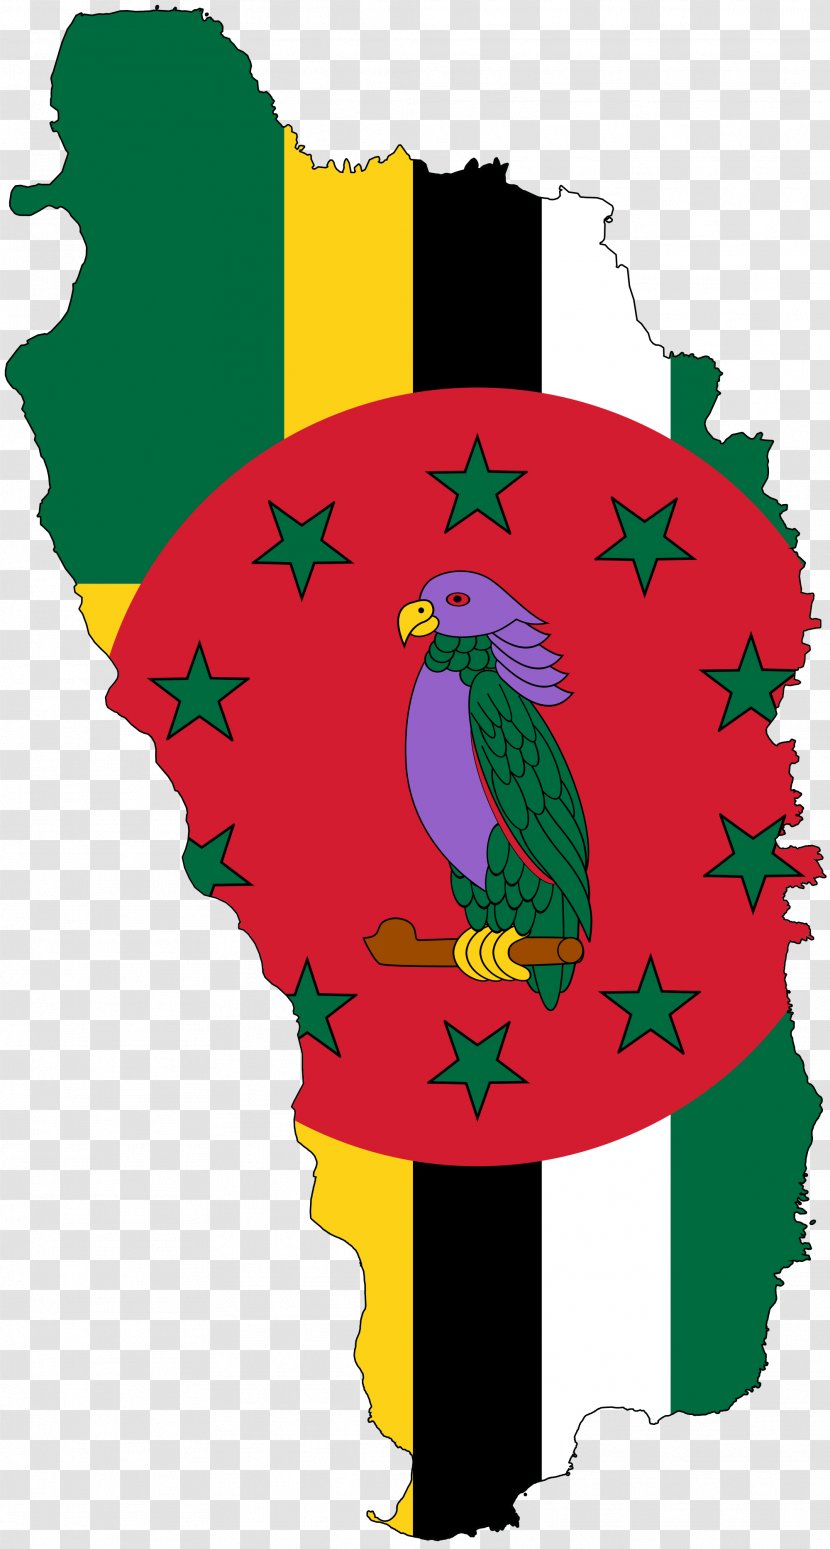 Flag Of Dominica The Dominican Republic - Heart Transparent PNG